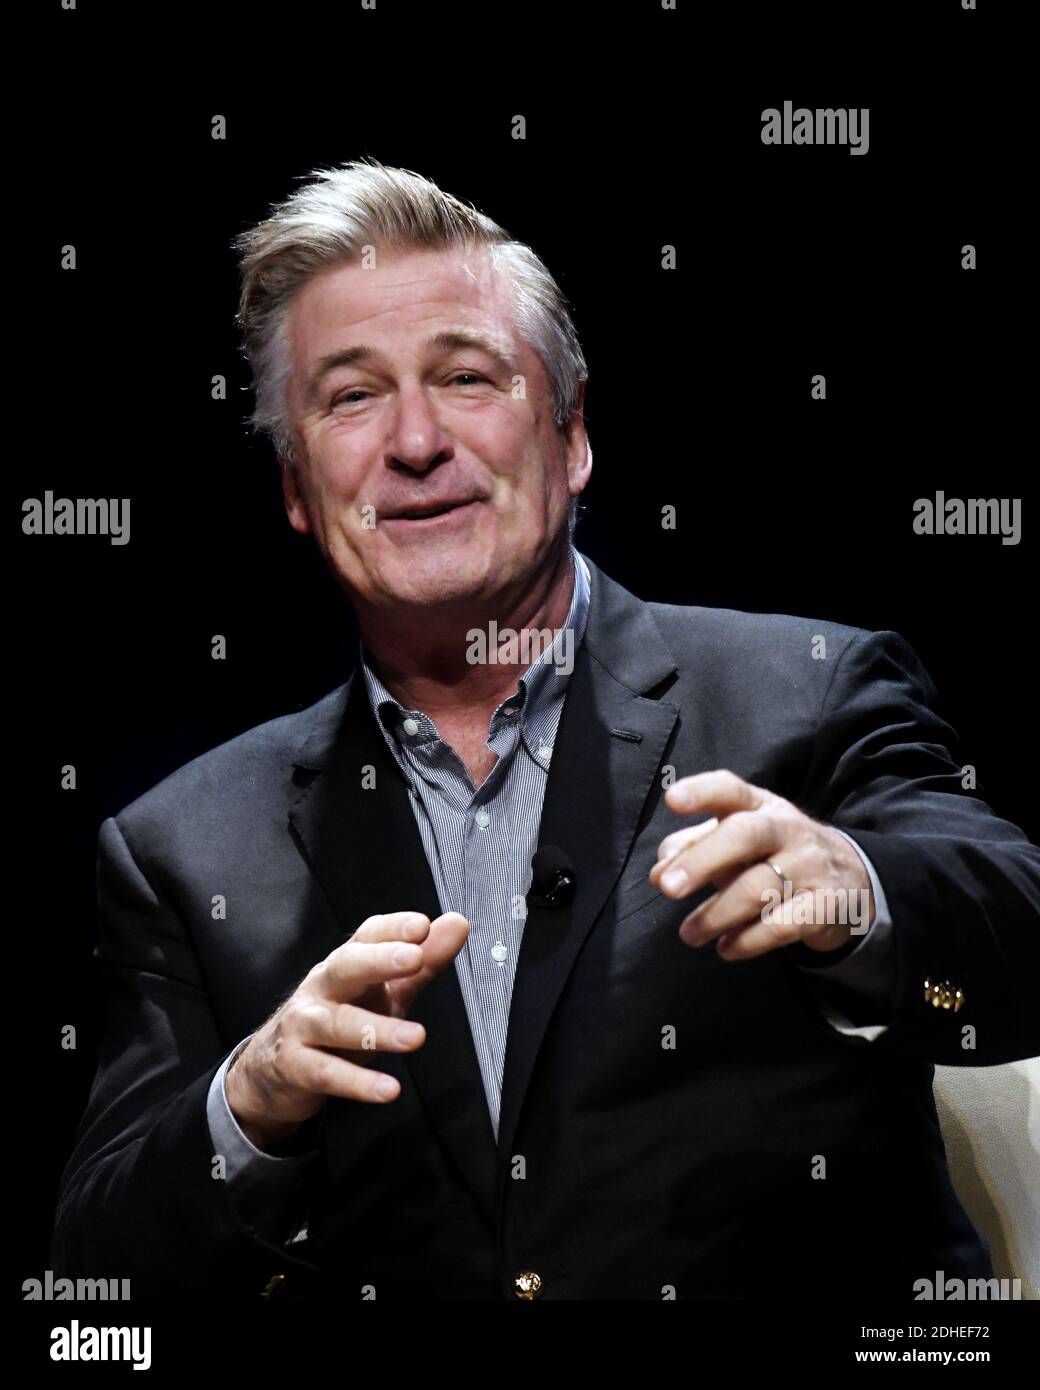 America’s foremost Donald Trump impersonator, Alec Baldwin speaks during an event to discuss the new book 'You Can’t Spell America Without Me ' a political satire of Donald Trump’s presidential memoir, November 14, 2017 at the George Washington Lisner Auditorium in Washington, DC, USA. Photo by Olivier Douliery/ABACAPRESS.COM Stock Photo